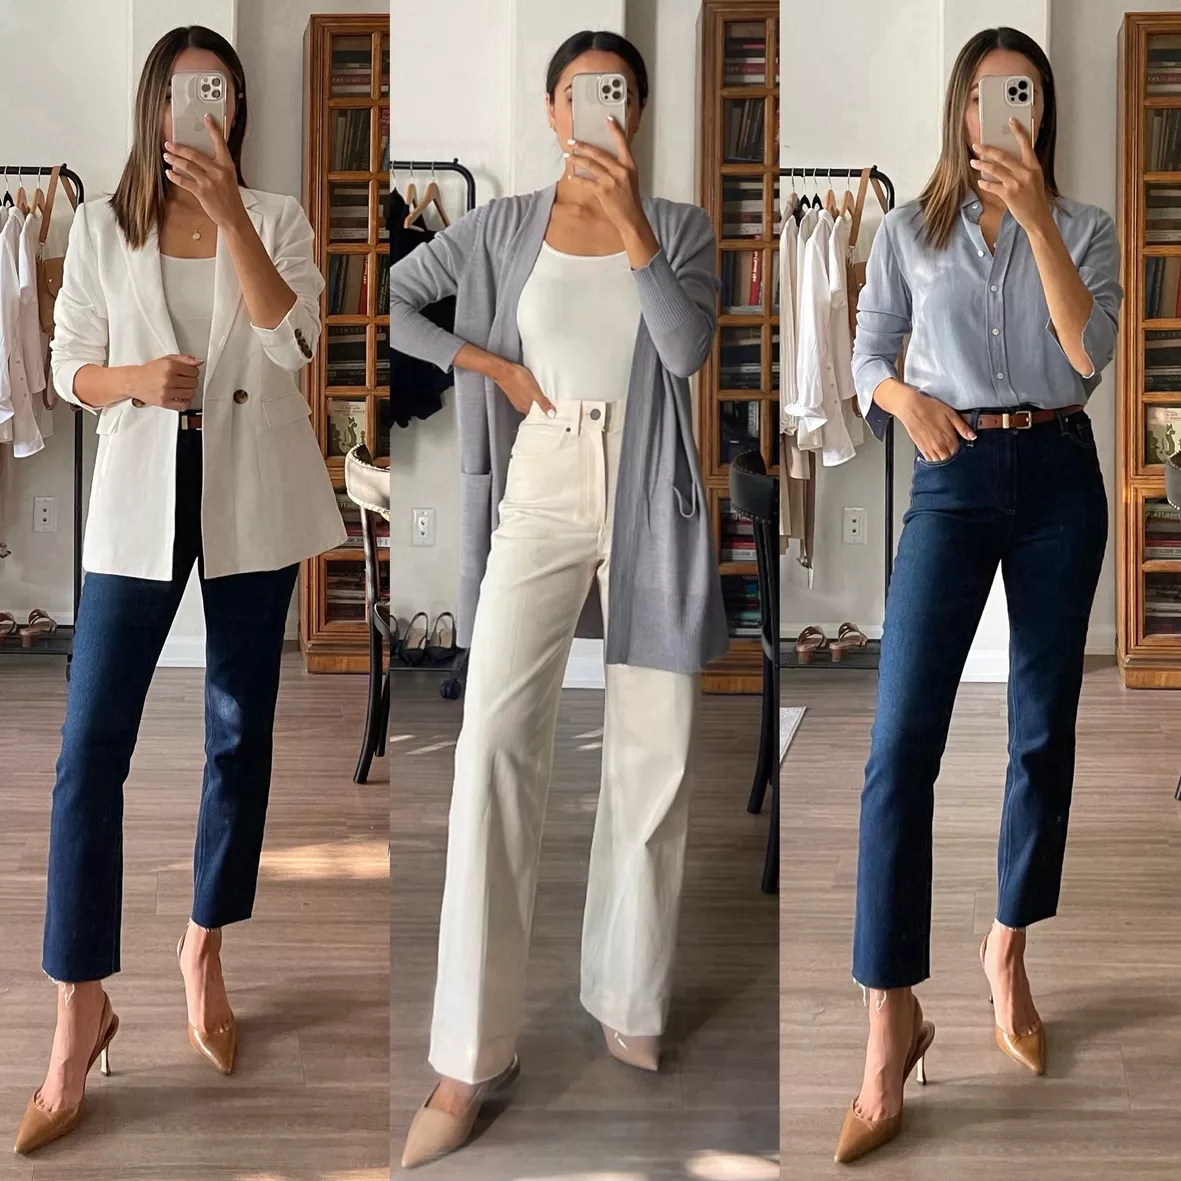 Work Outfit Ideas Approved by Nordstrom Stylists